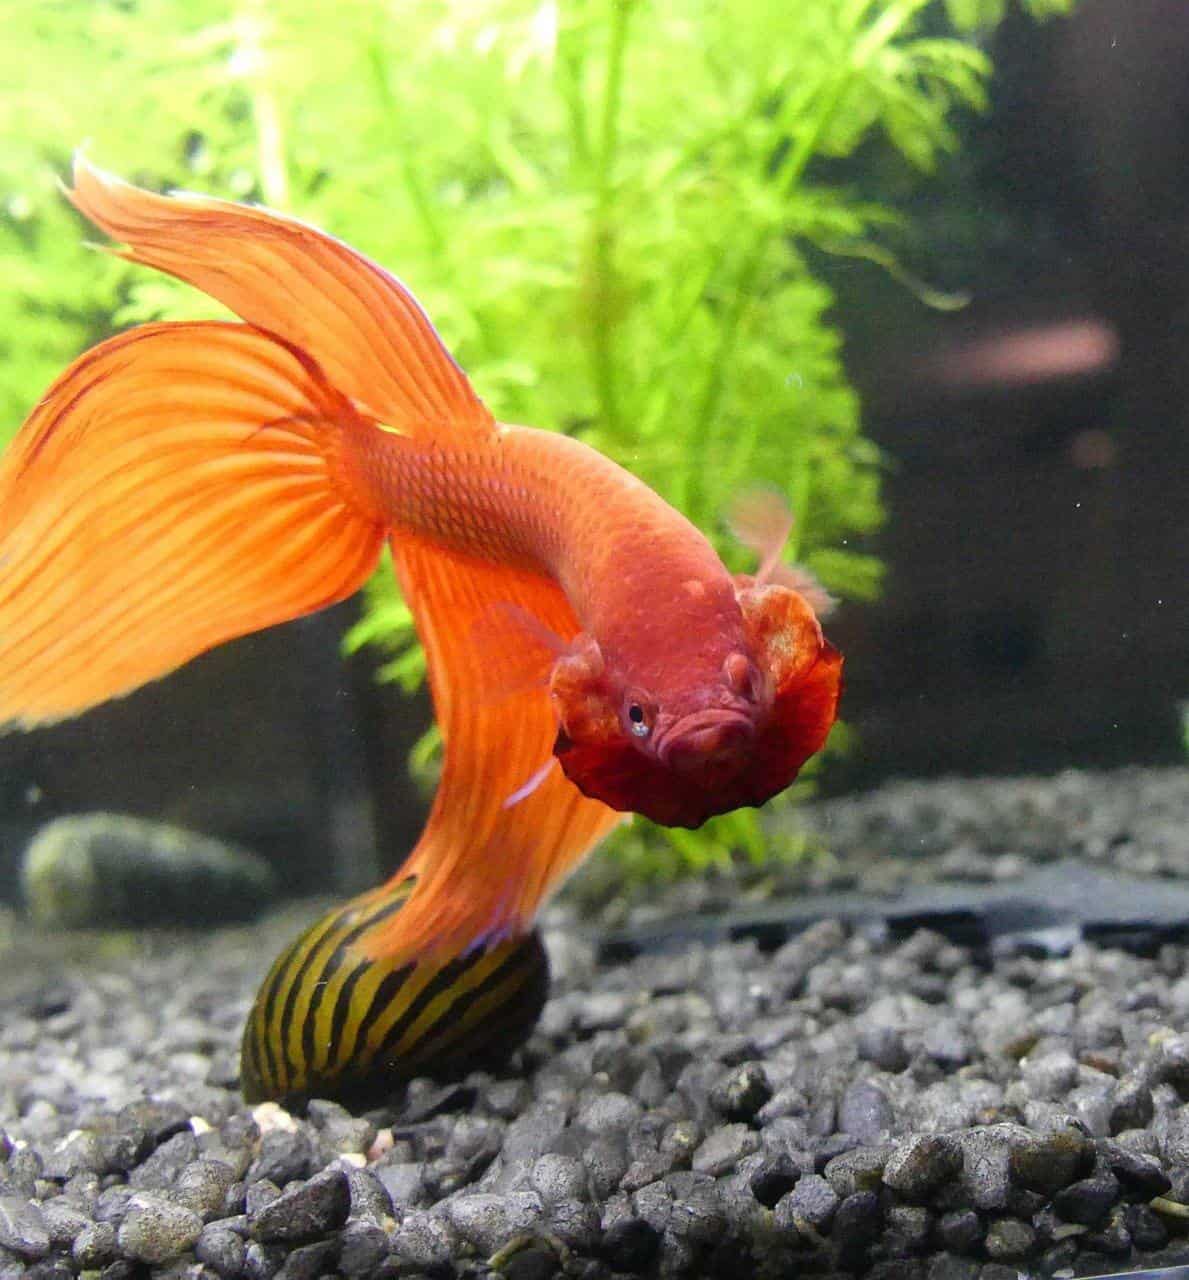 Why Is My Betta Fish Flaring at Me? 2